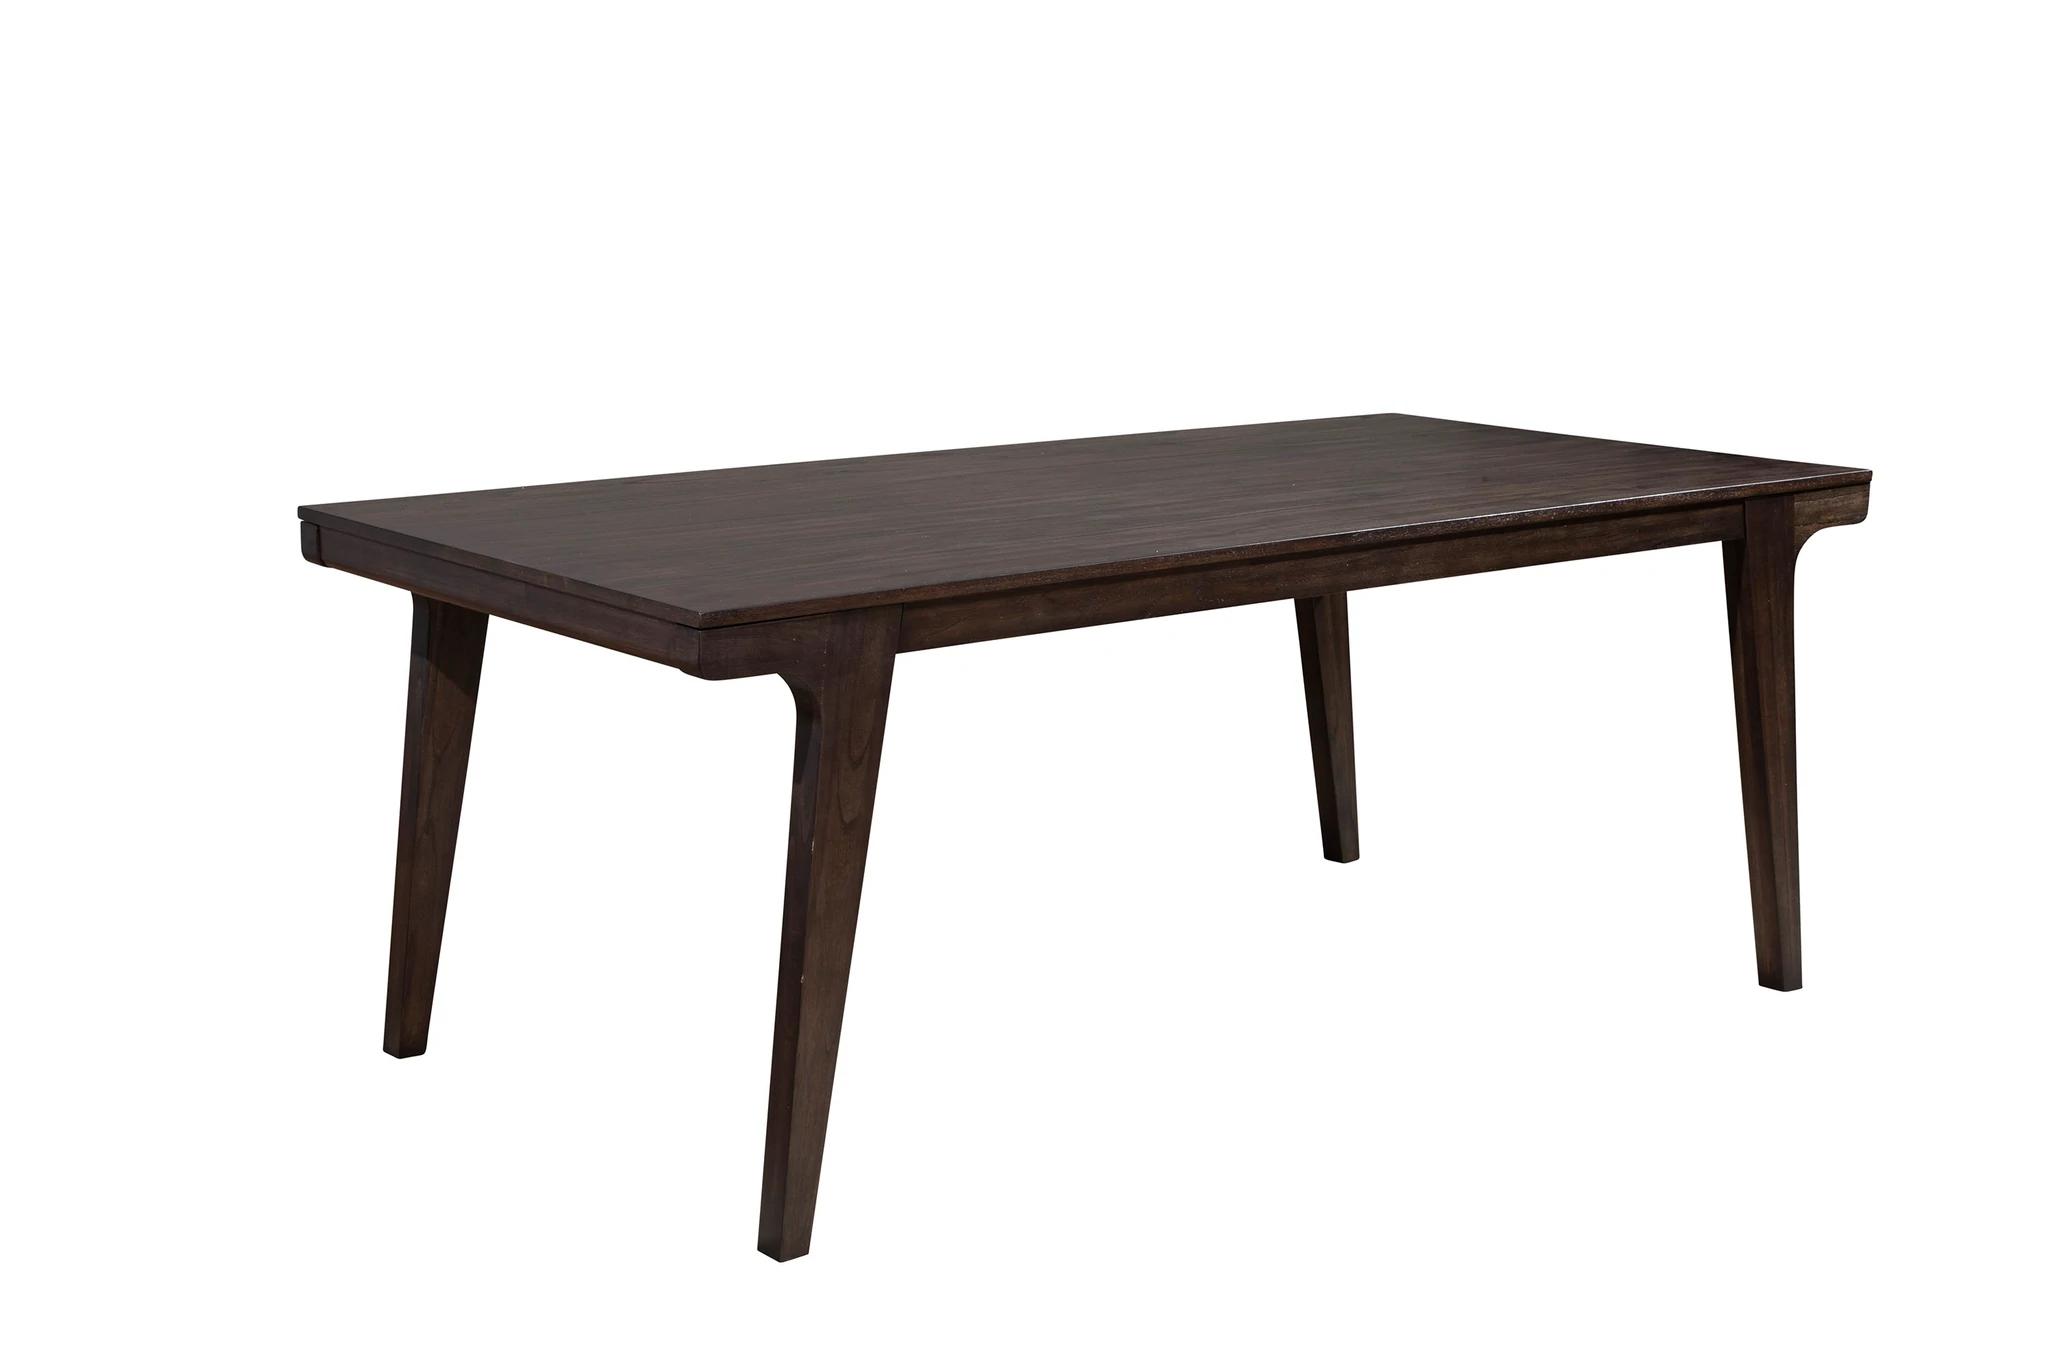 Contemporary, Rustic Dining Table OLEJO 3315-01 in Chocolate 